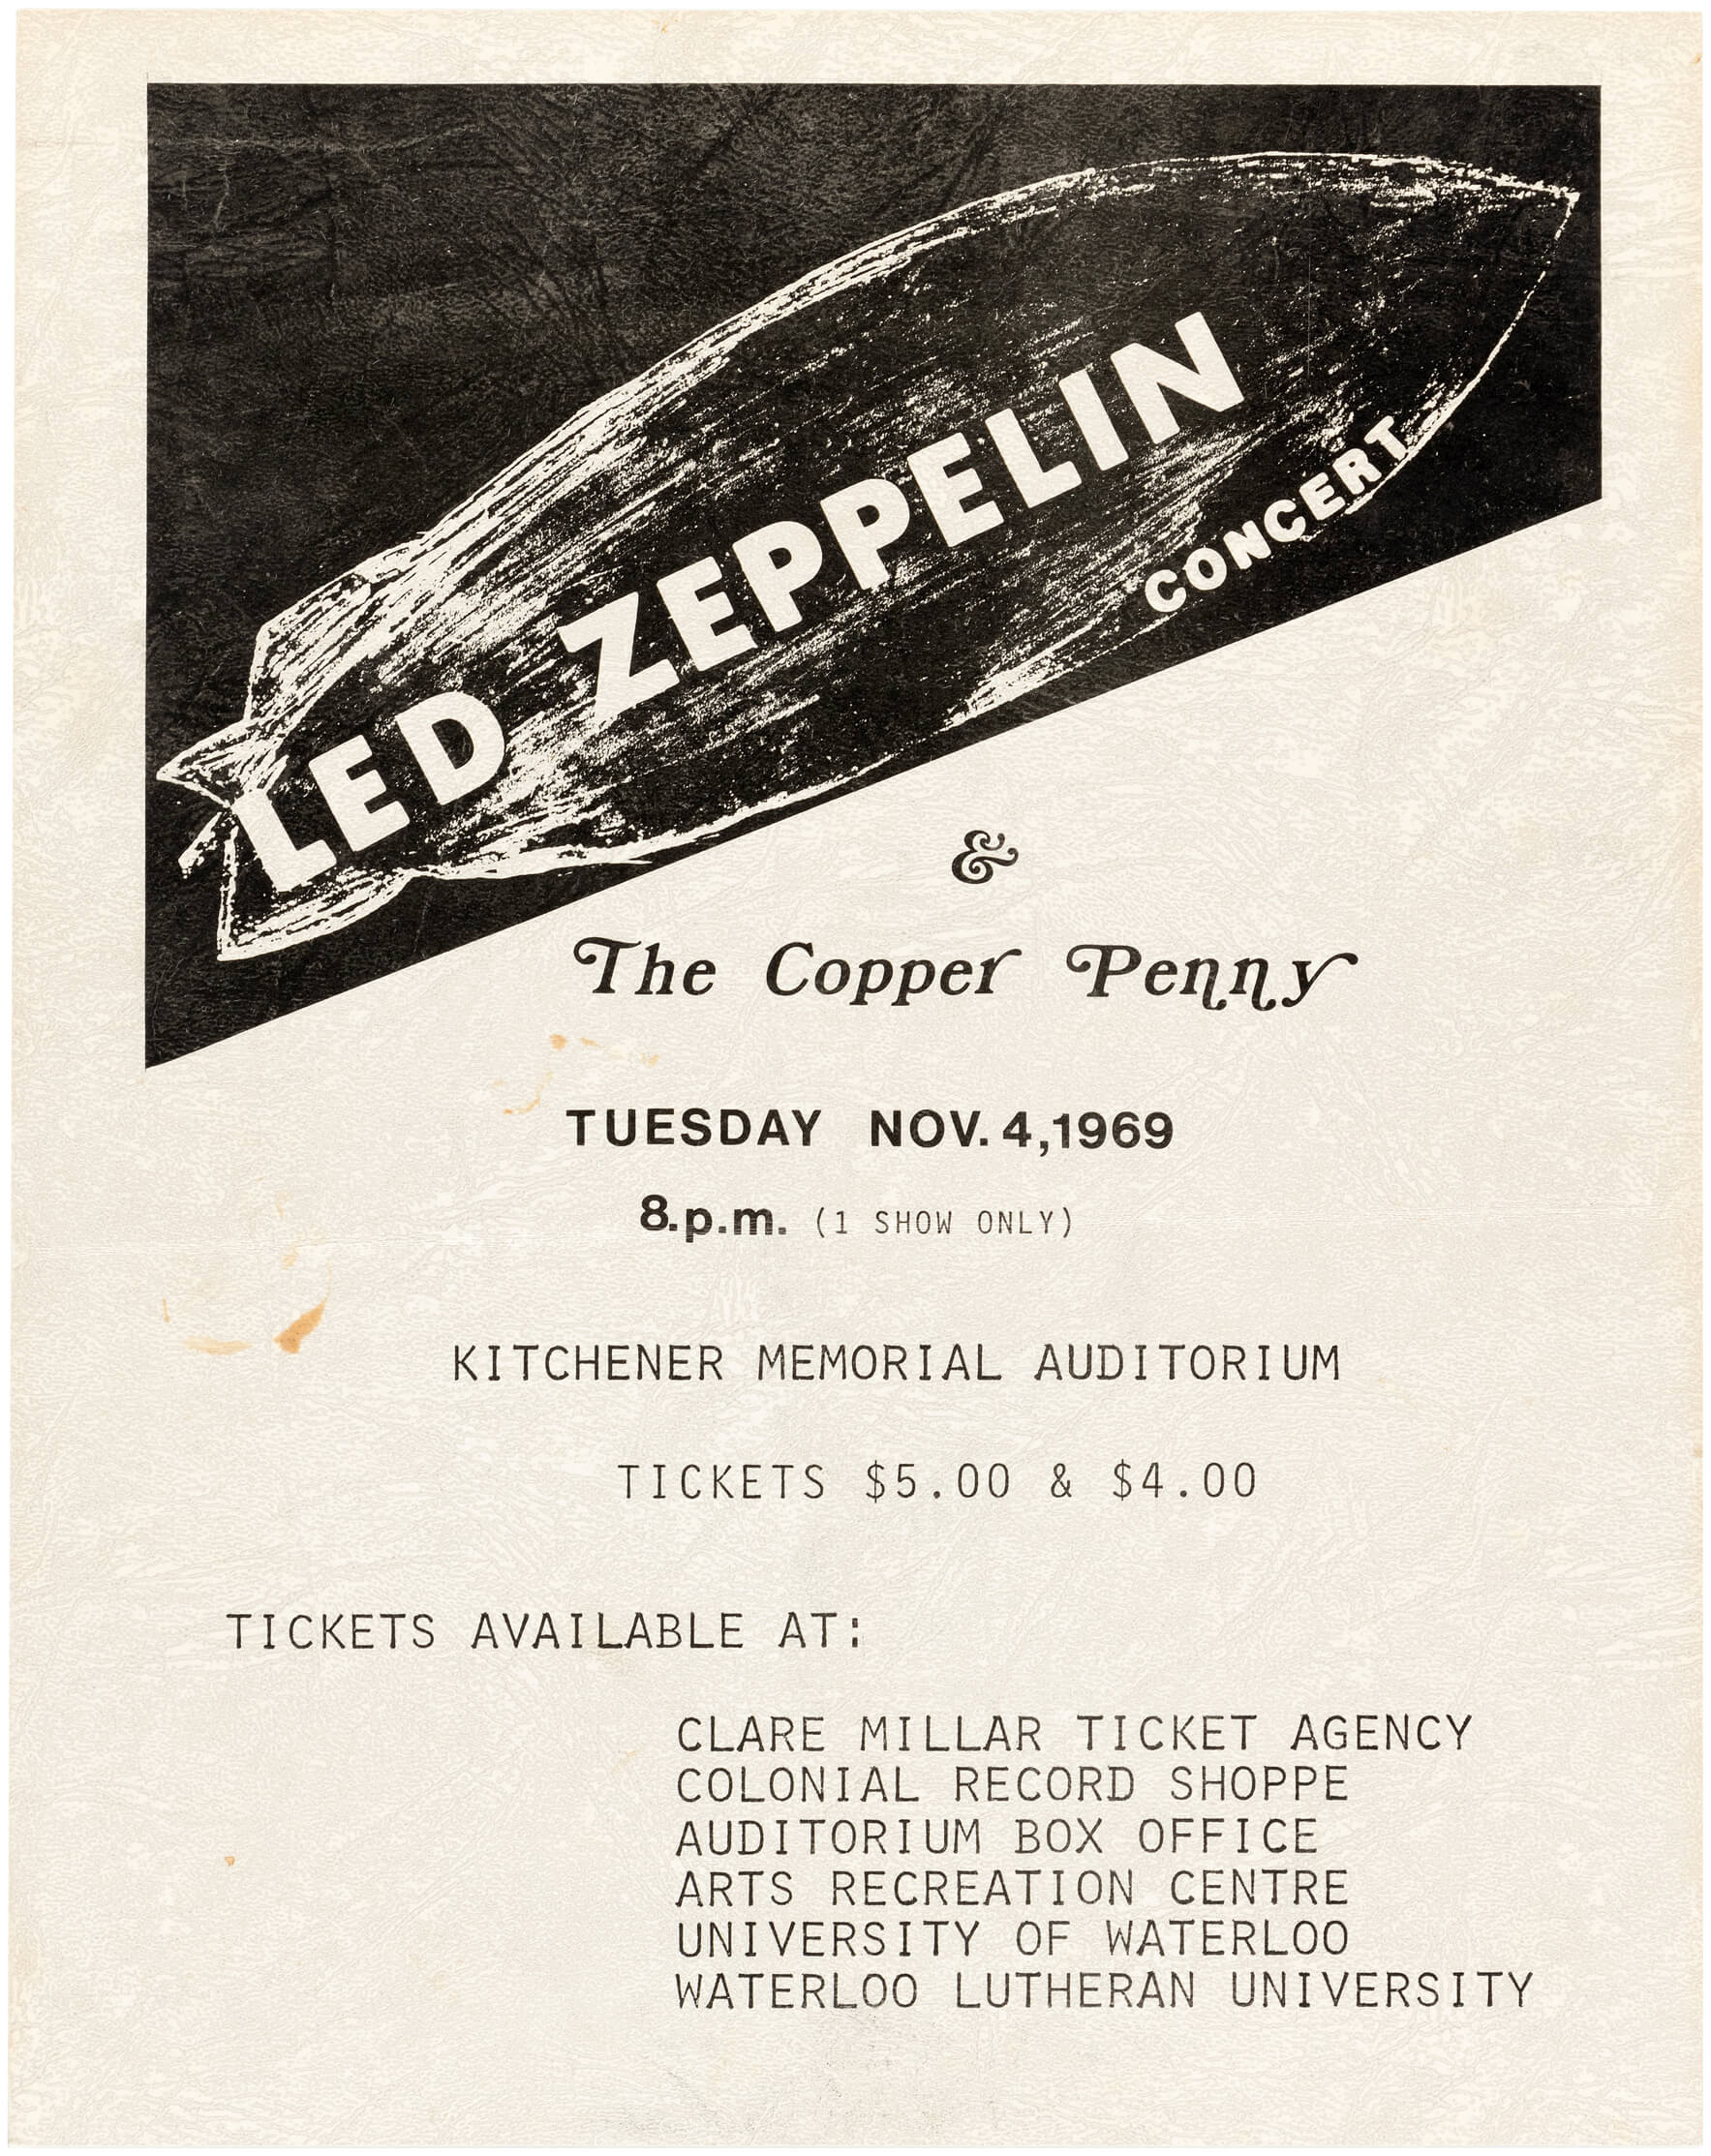 Primitive, early Led Zeppelin concert poster promoting a 1969 show in Kitchener, Ontario, Canada, with the opening band Copperpenny. Likely unique. Accompanied by letter from original owner’s brother plus Hake’s COA. Est. $10,000-$20,000. Image courtesy of Hake’s Auctions